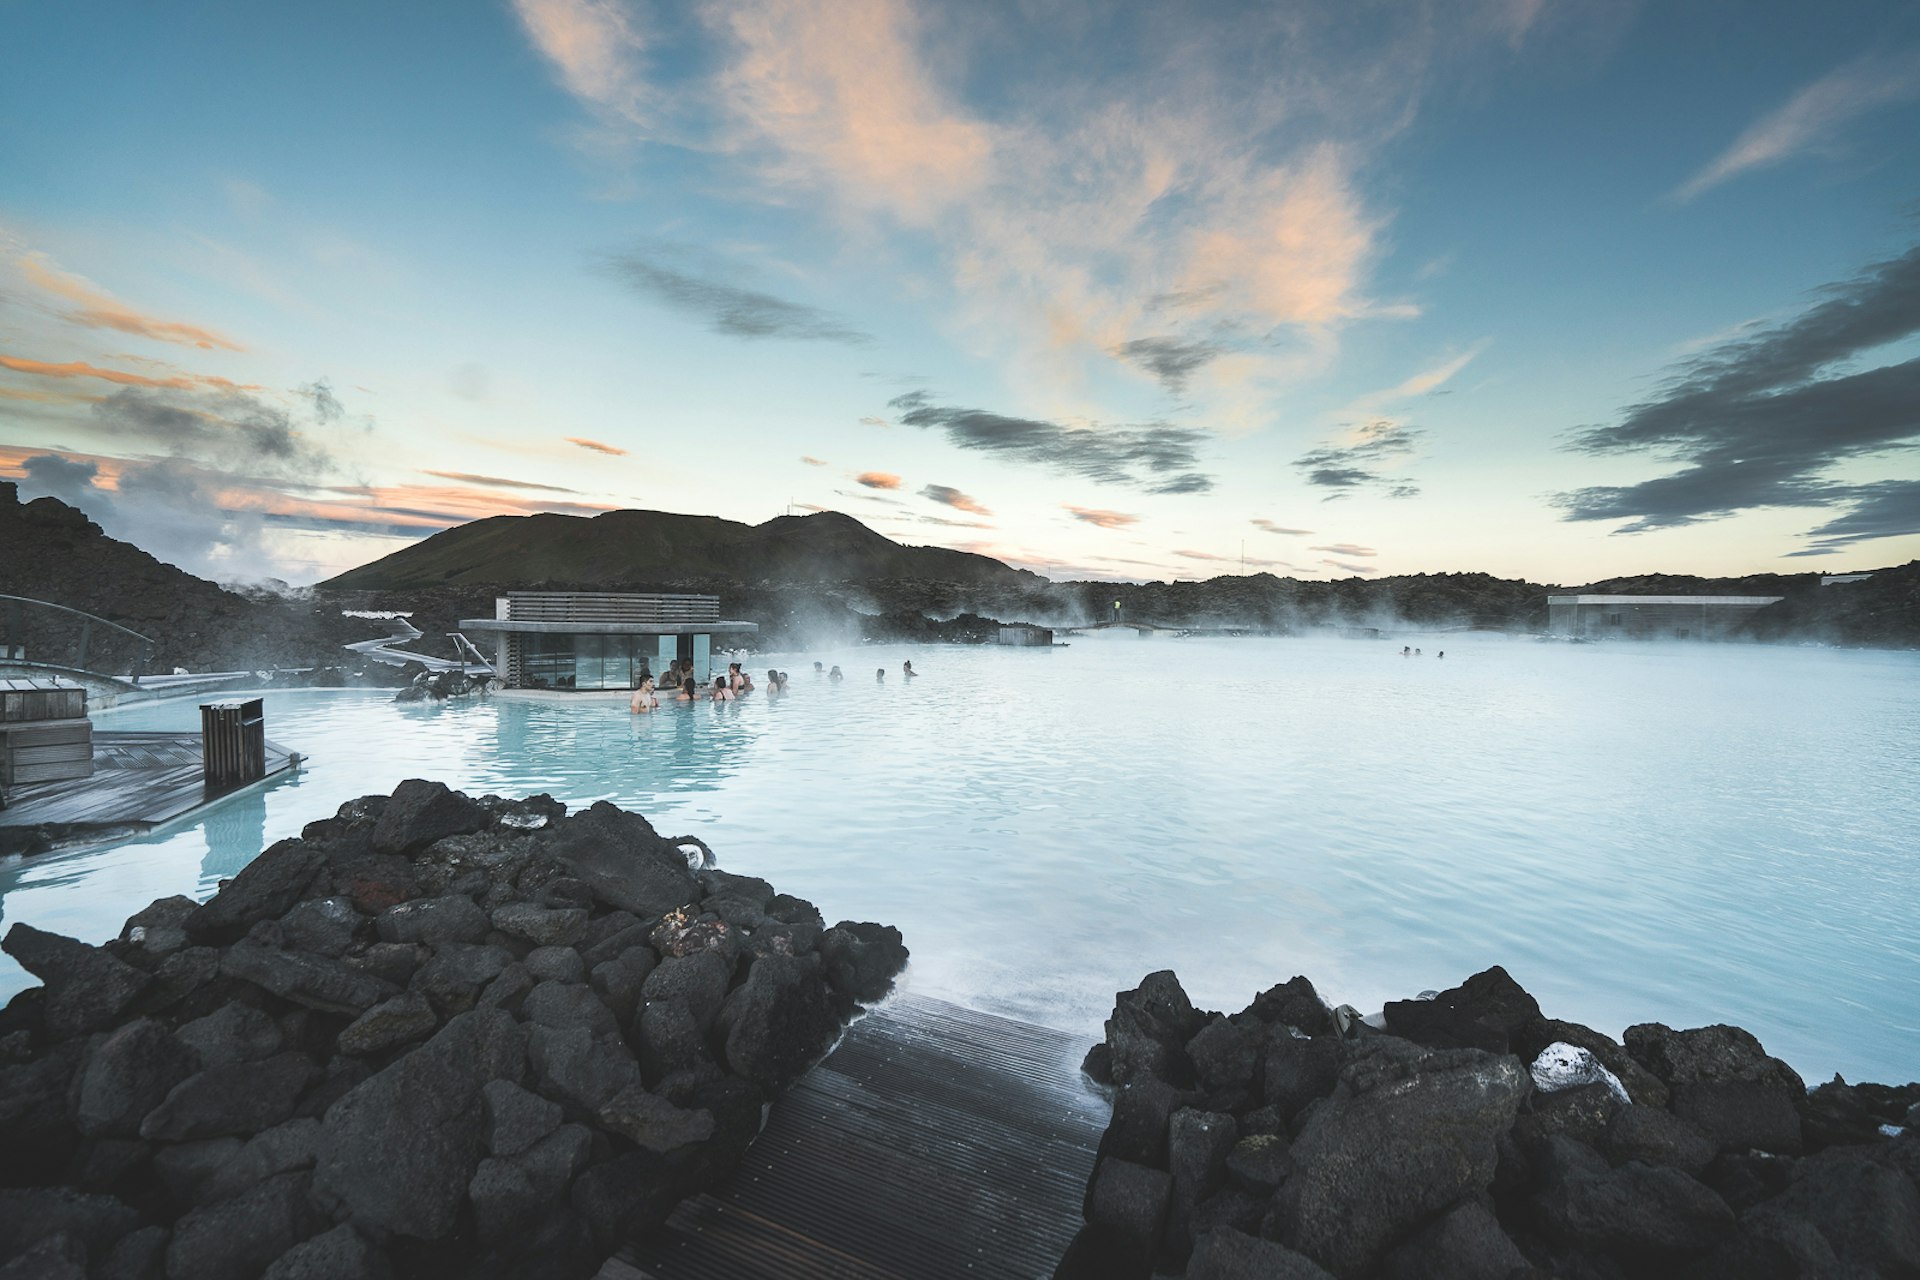 People enjoying the Blue Lagoon in Iceland, surrounded by rocky mountains 